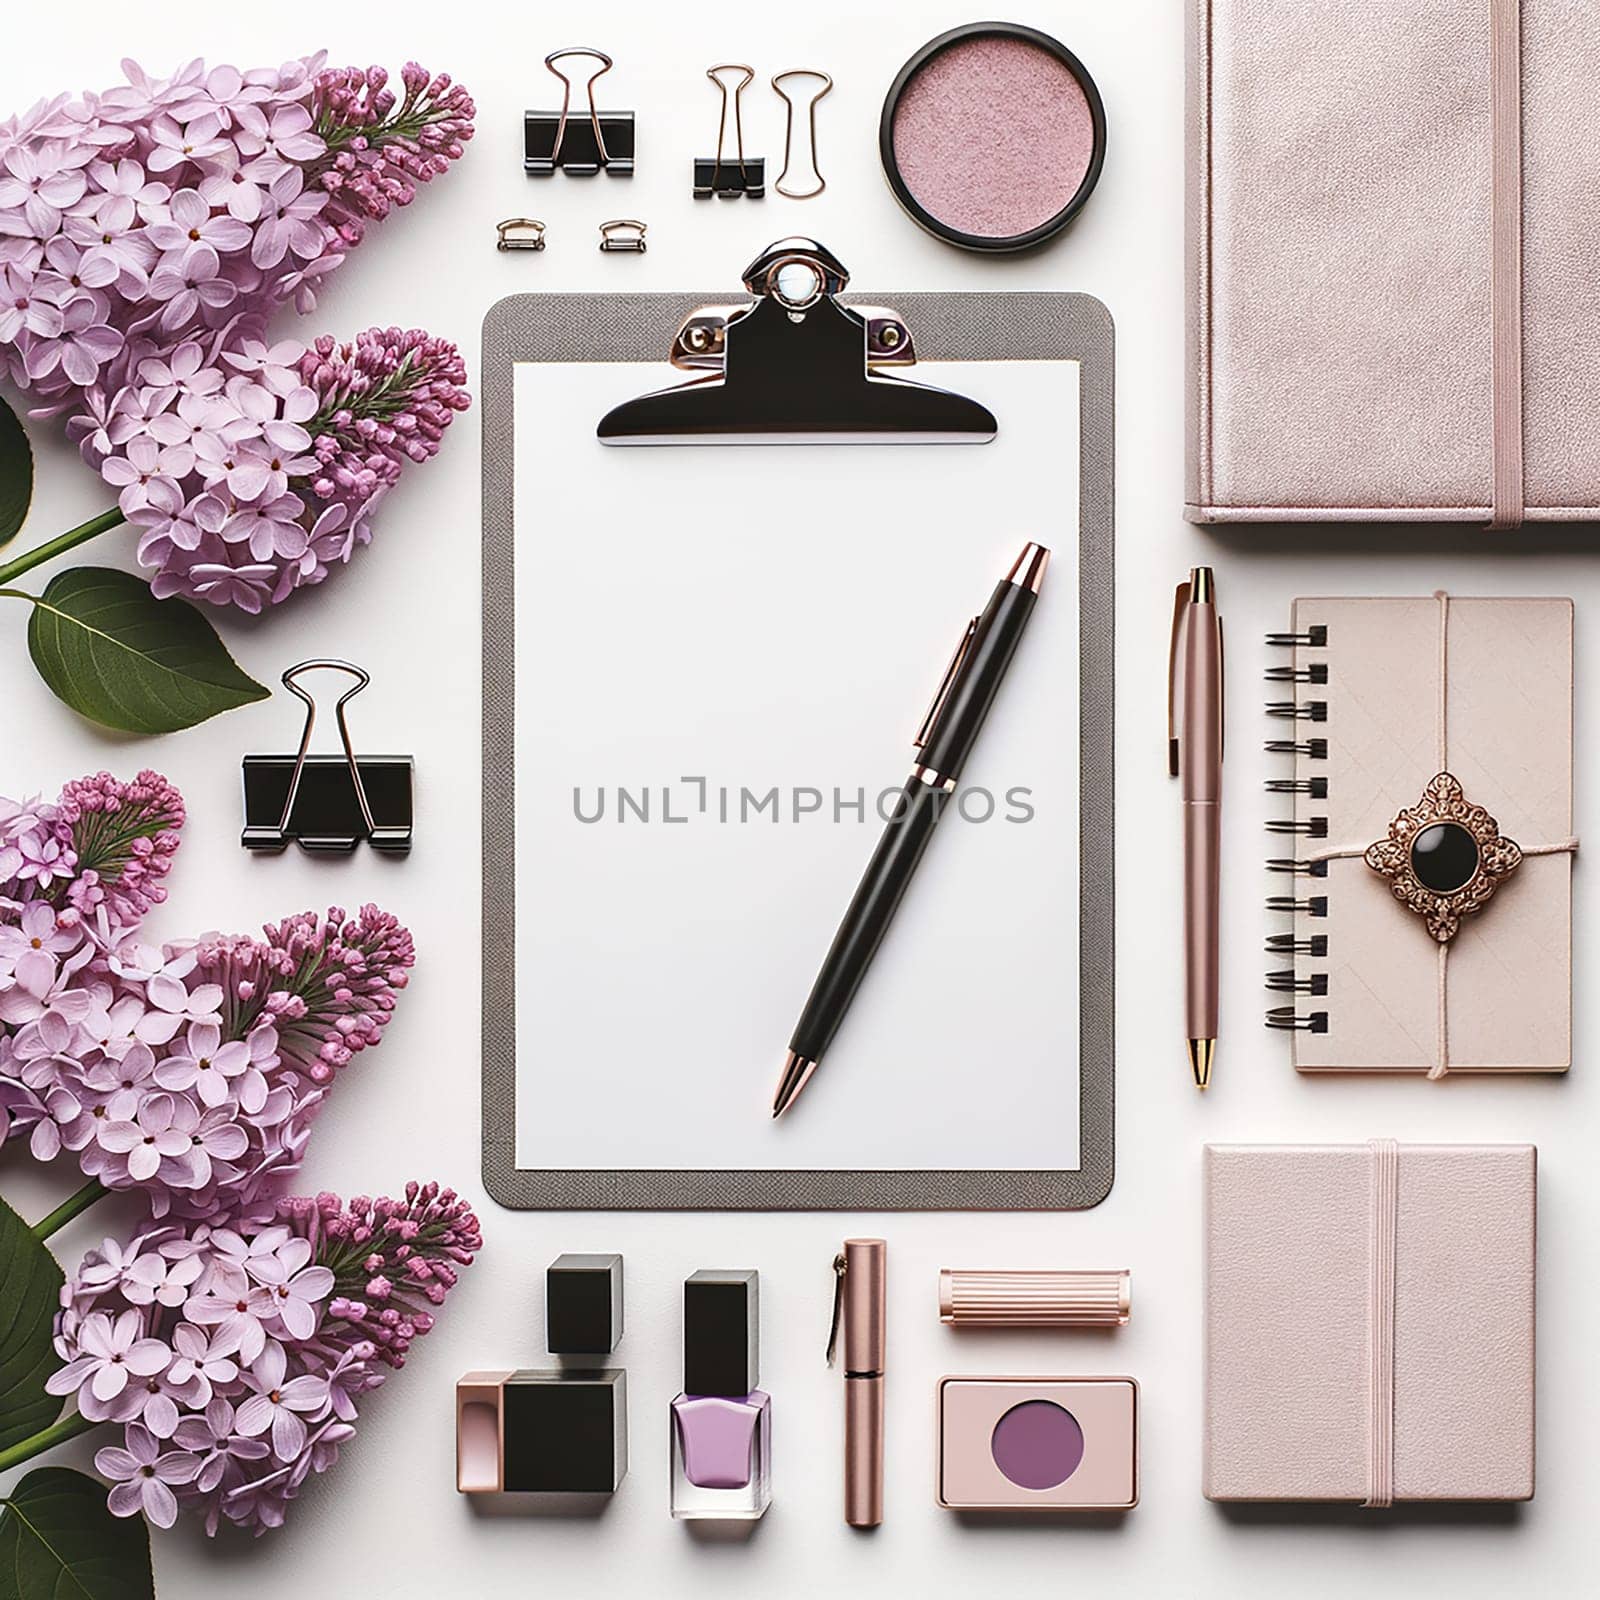 Clean and Tidy: Organized Workspace with Lilac Touches